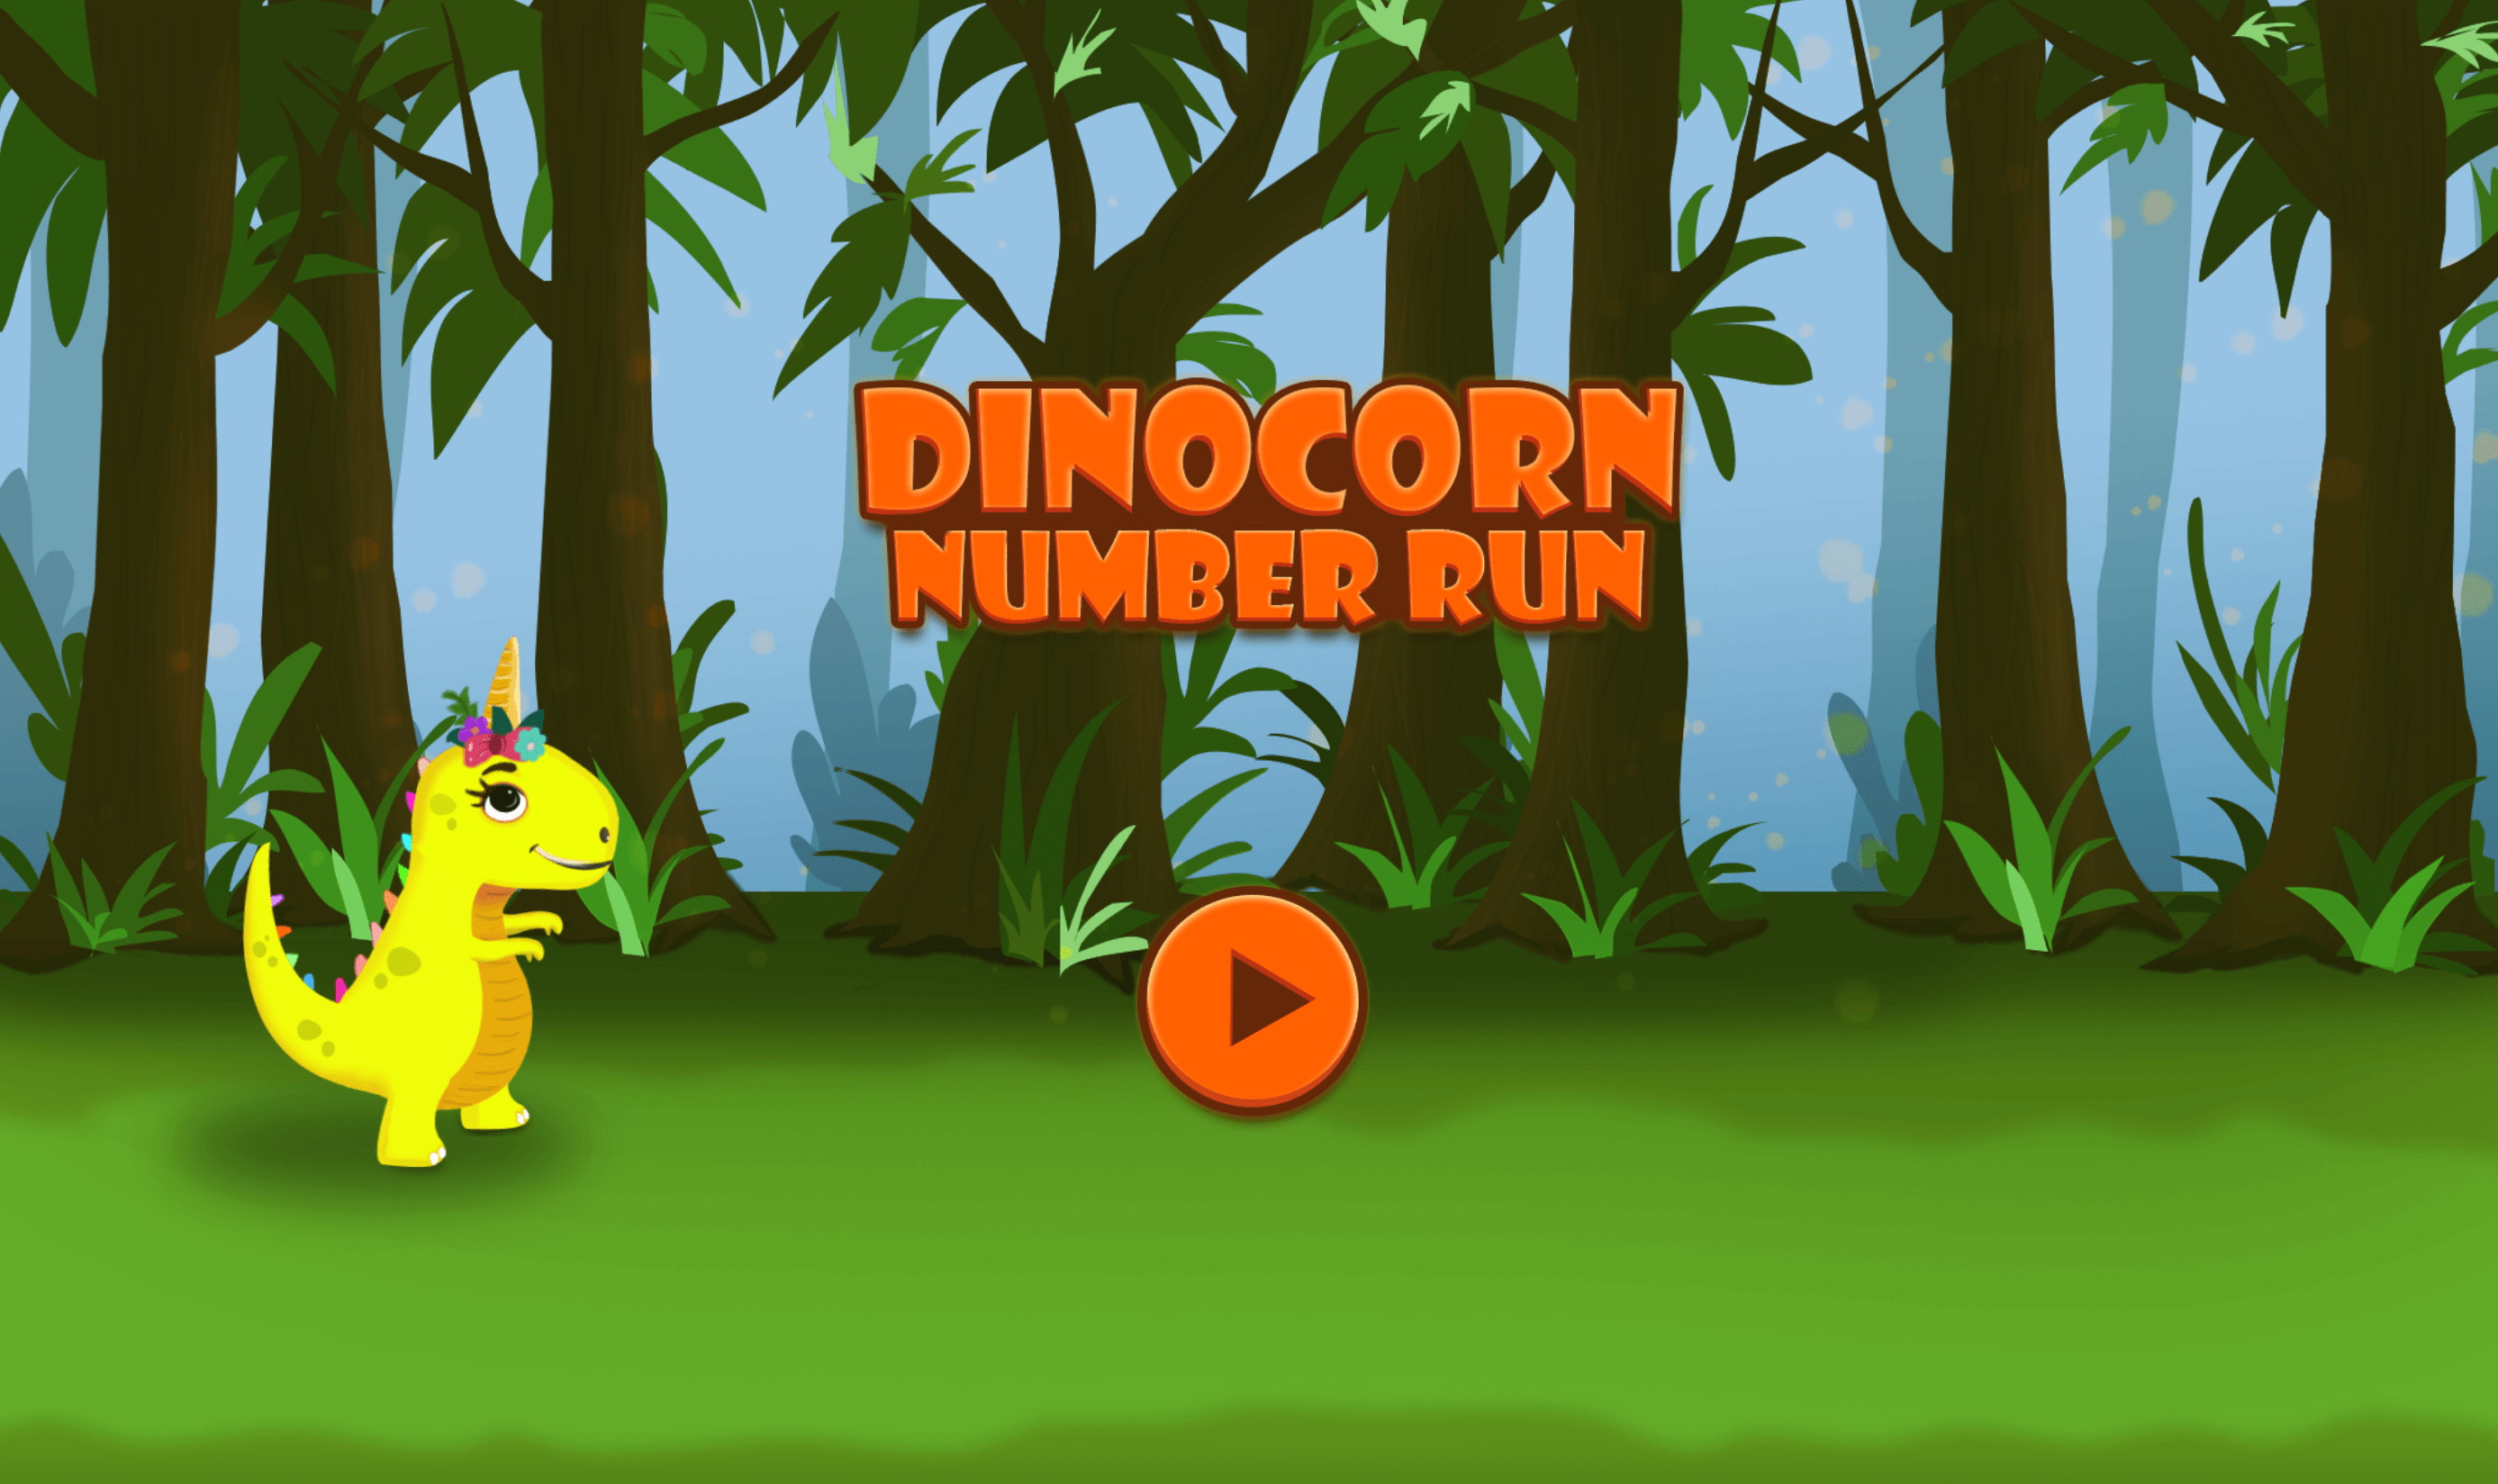 Game title screen featuring a dinosaur/unicorn hybrid and an orange play button.